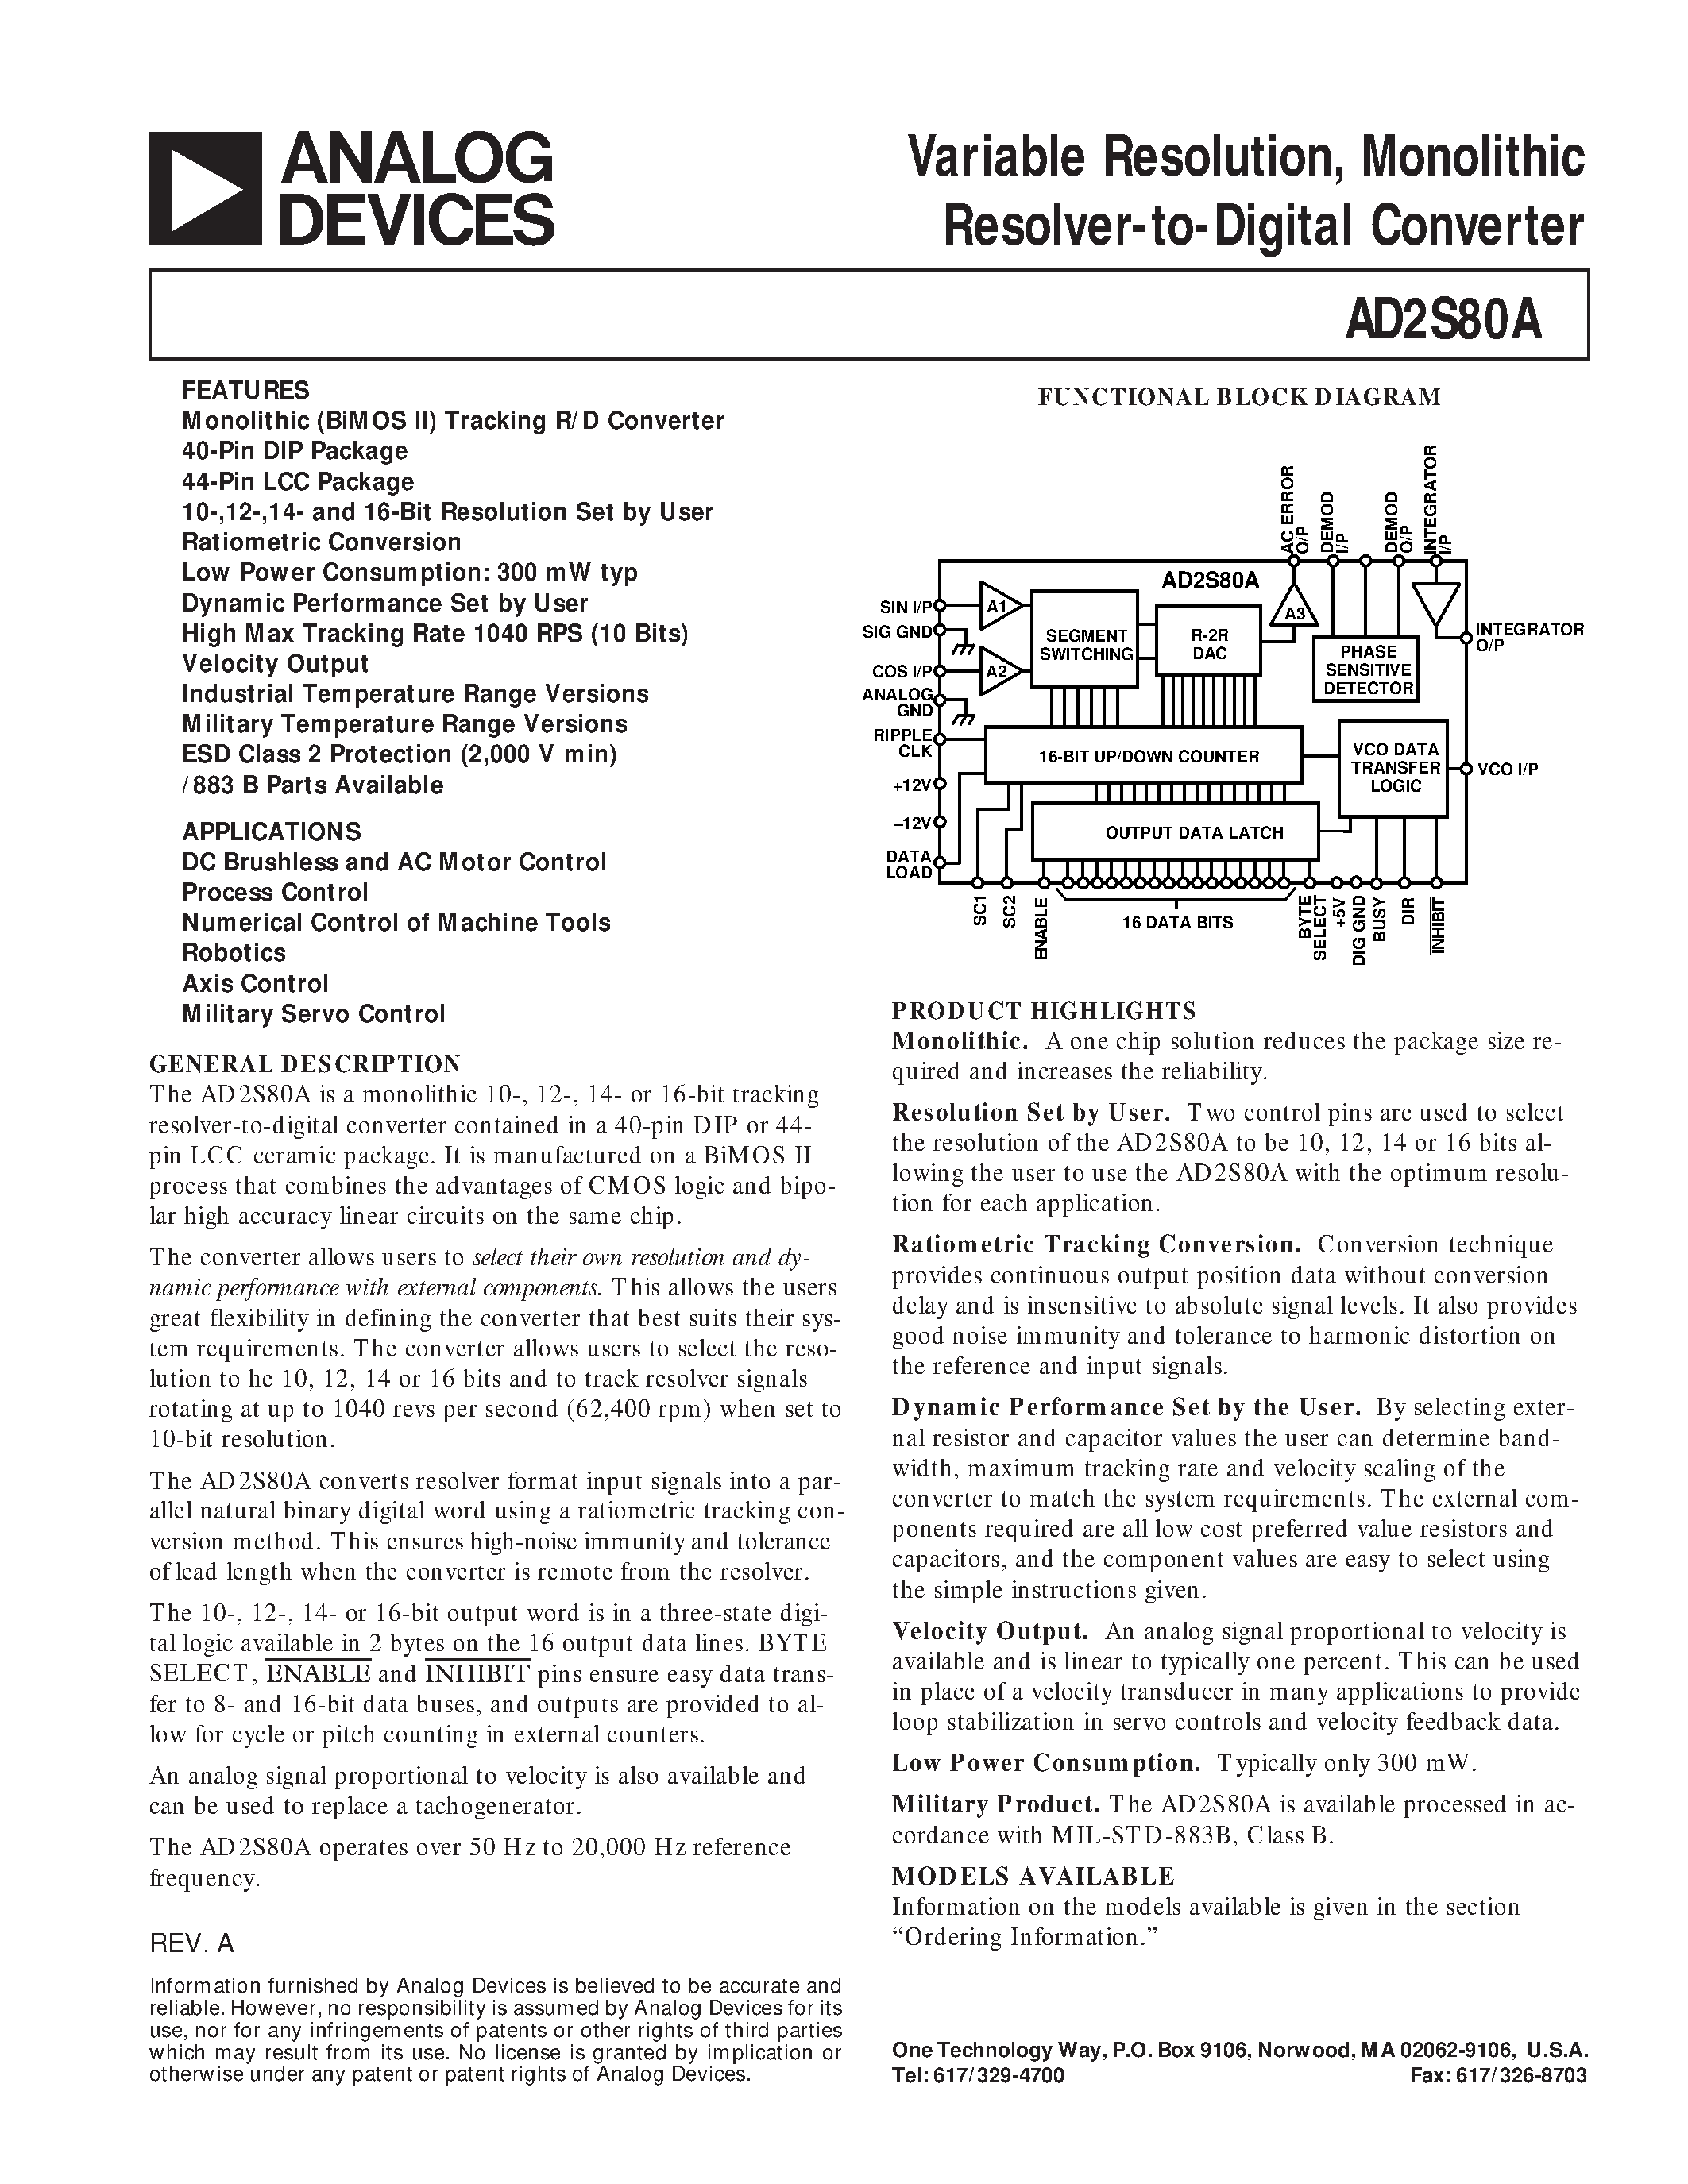 Datasheet AD2S80ATD - Variable Resolution/ Monolithic Resolver-to-Digital Converter page 1